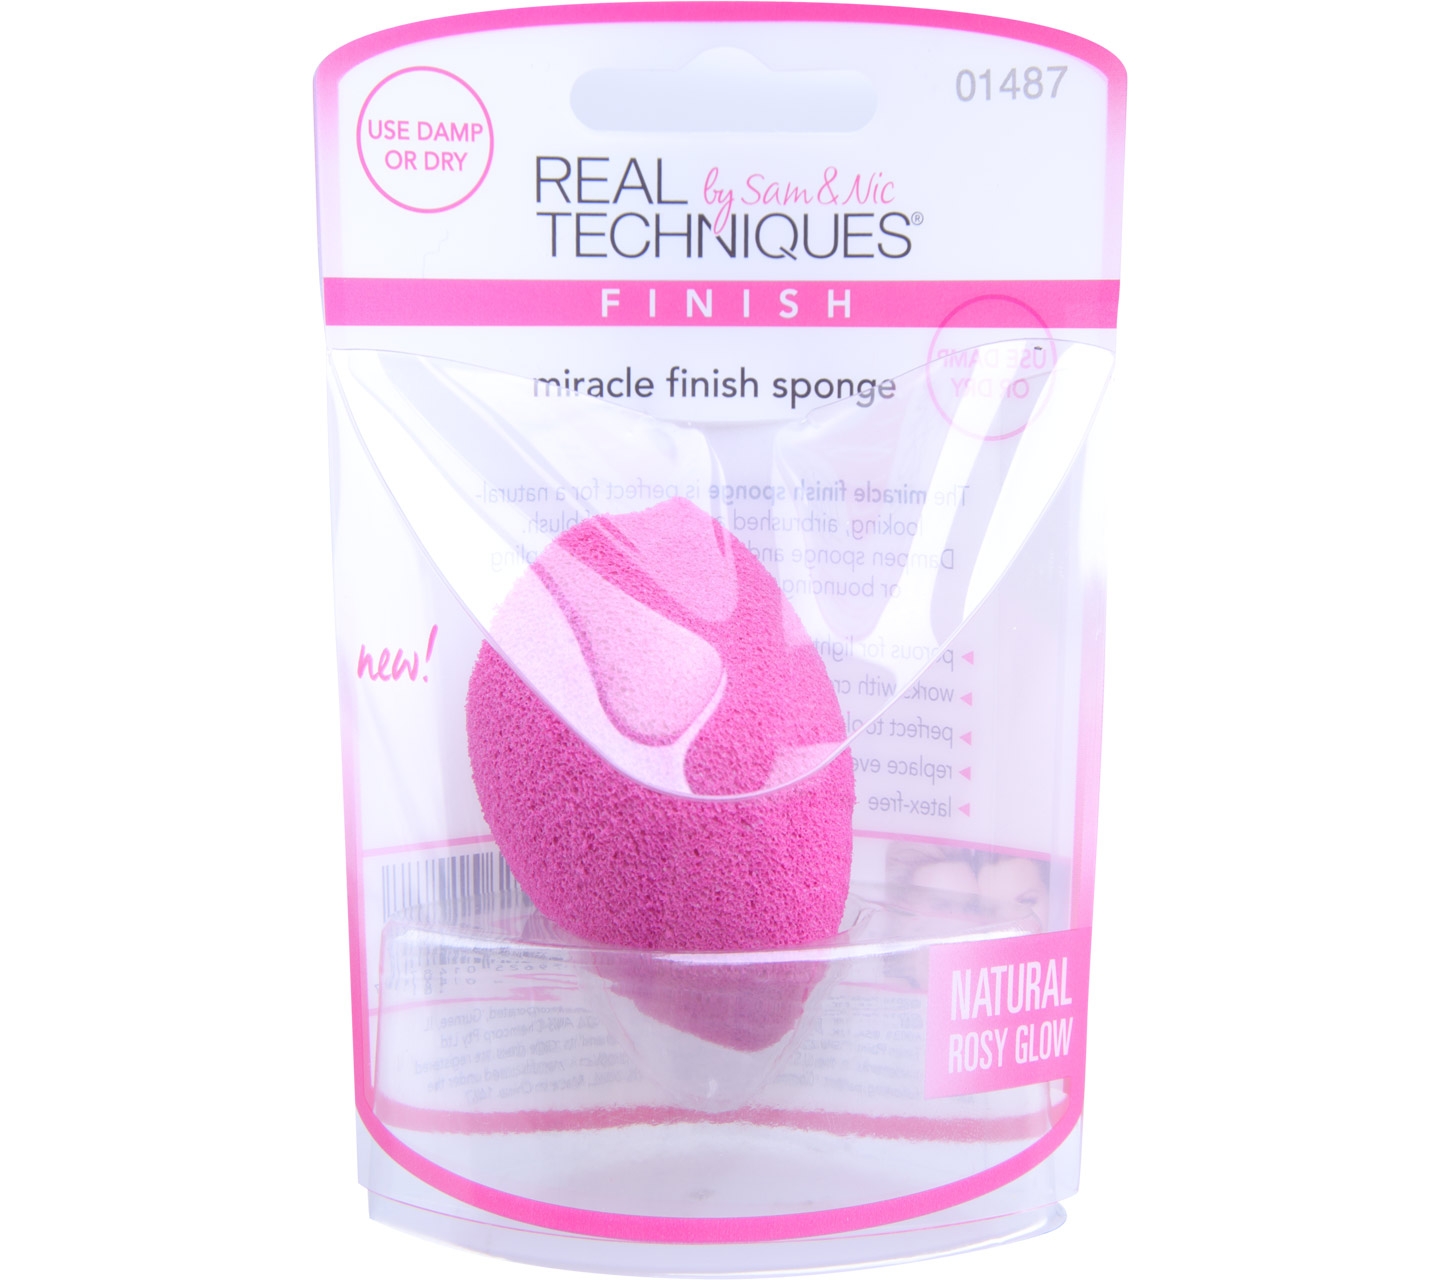 Real Techniques Pink Natural Rosy Glow Miracle Finish Sponge Tools